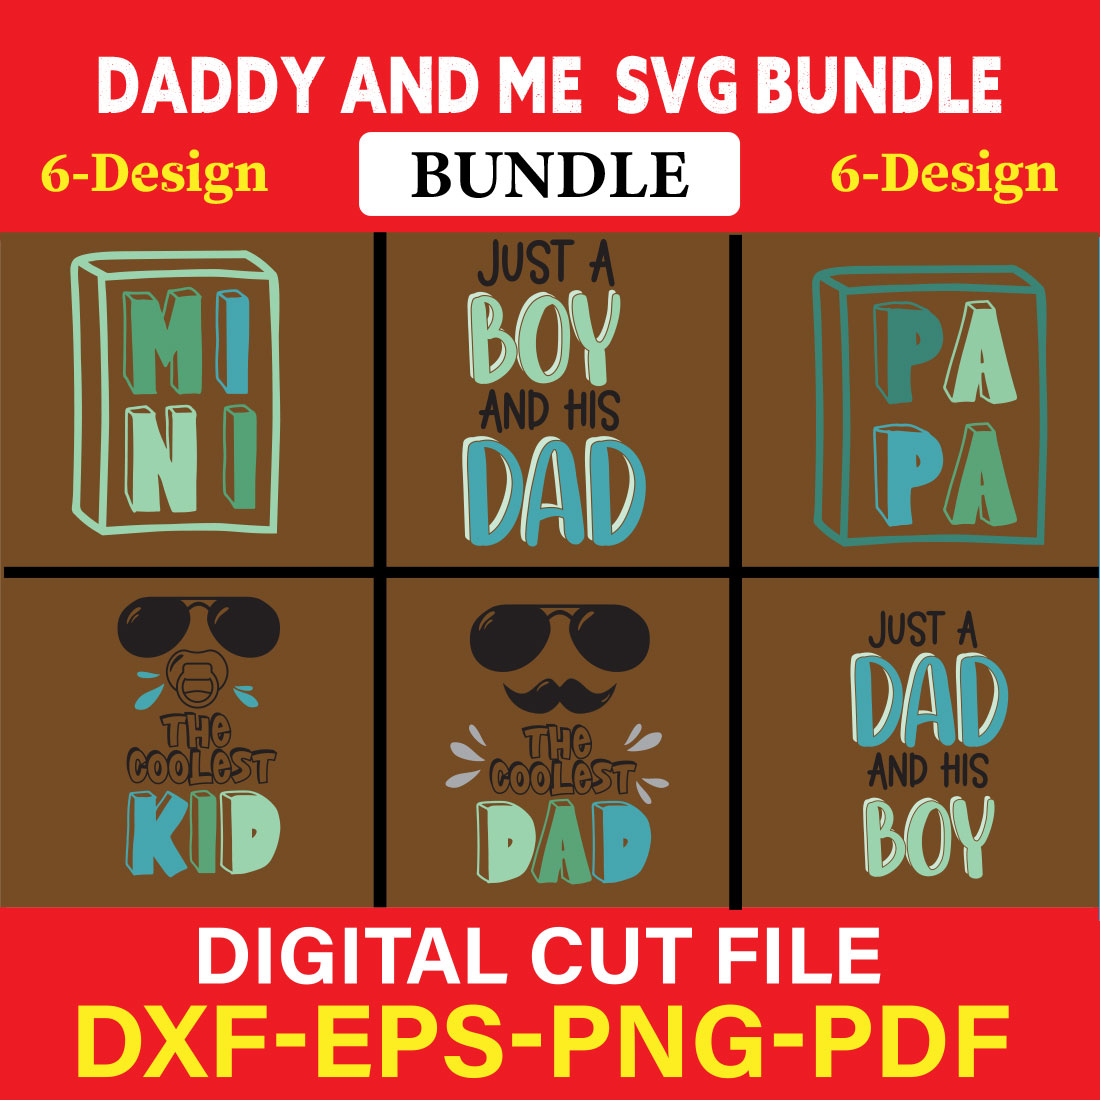 Daddy And Me T-shirt Design Bundle Vol-1 cover image.